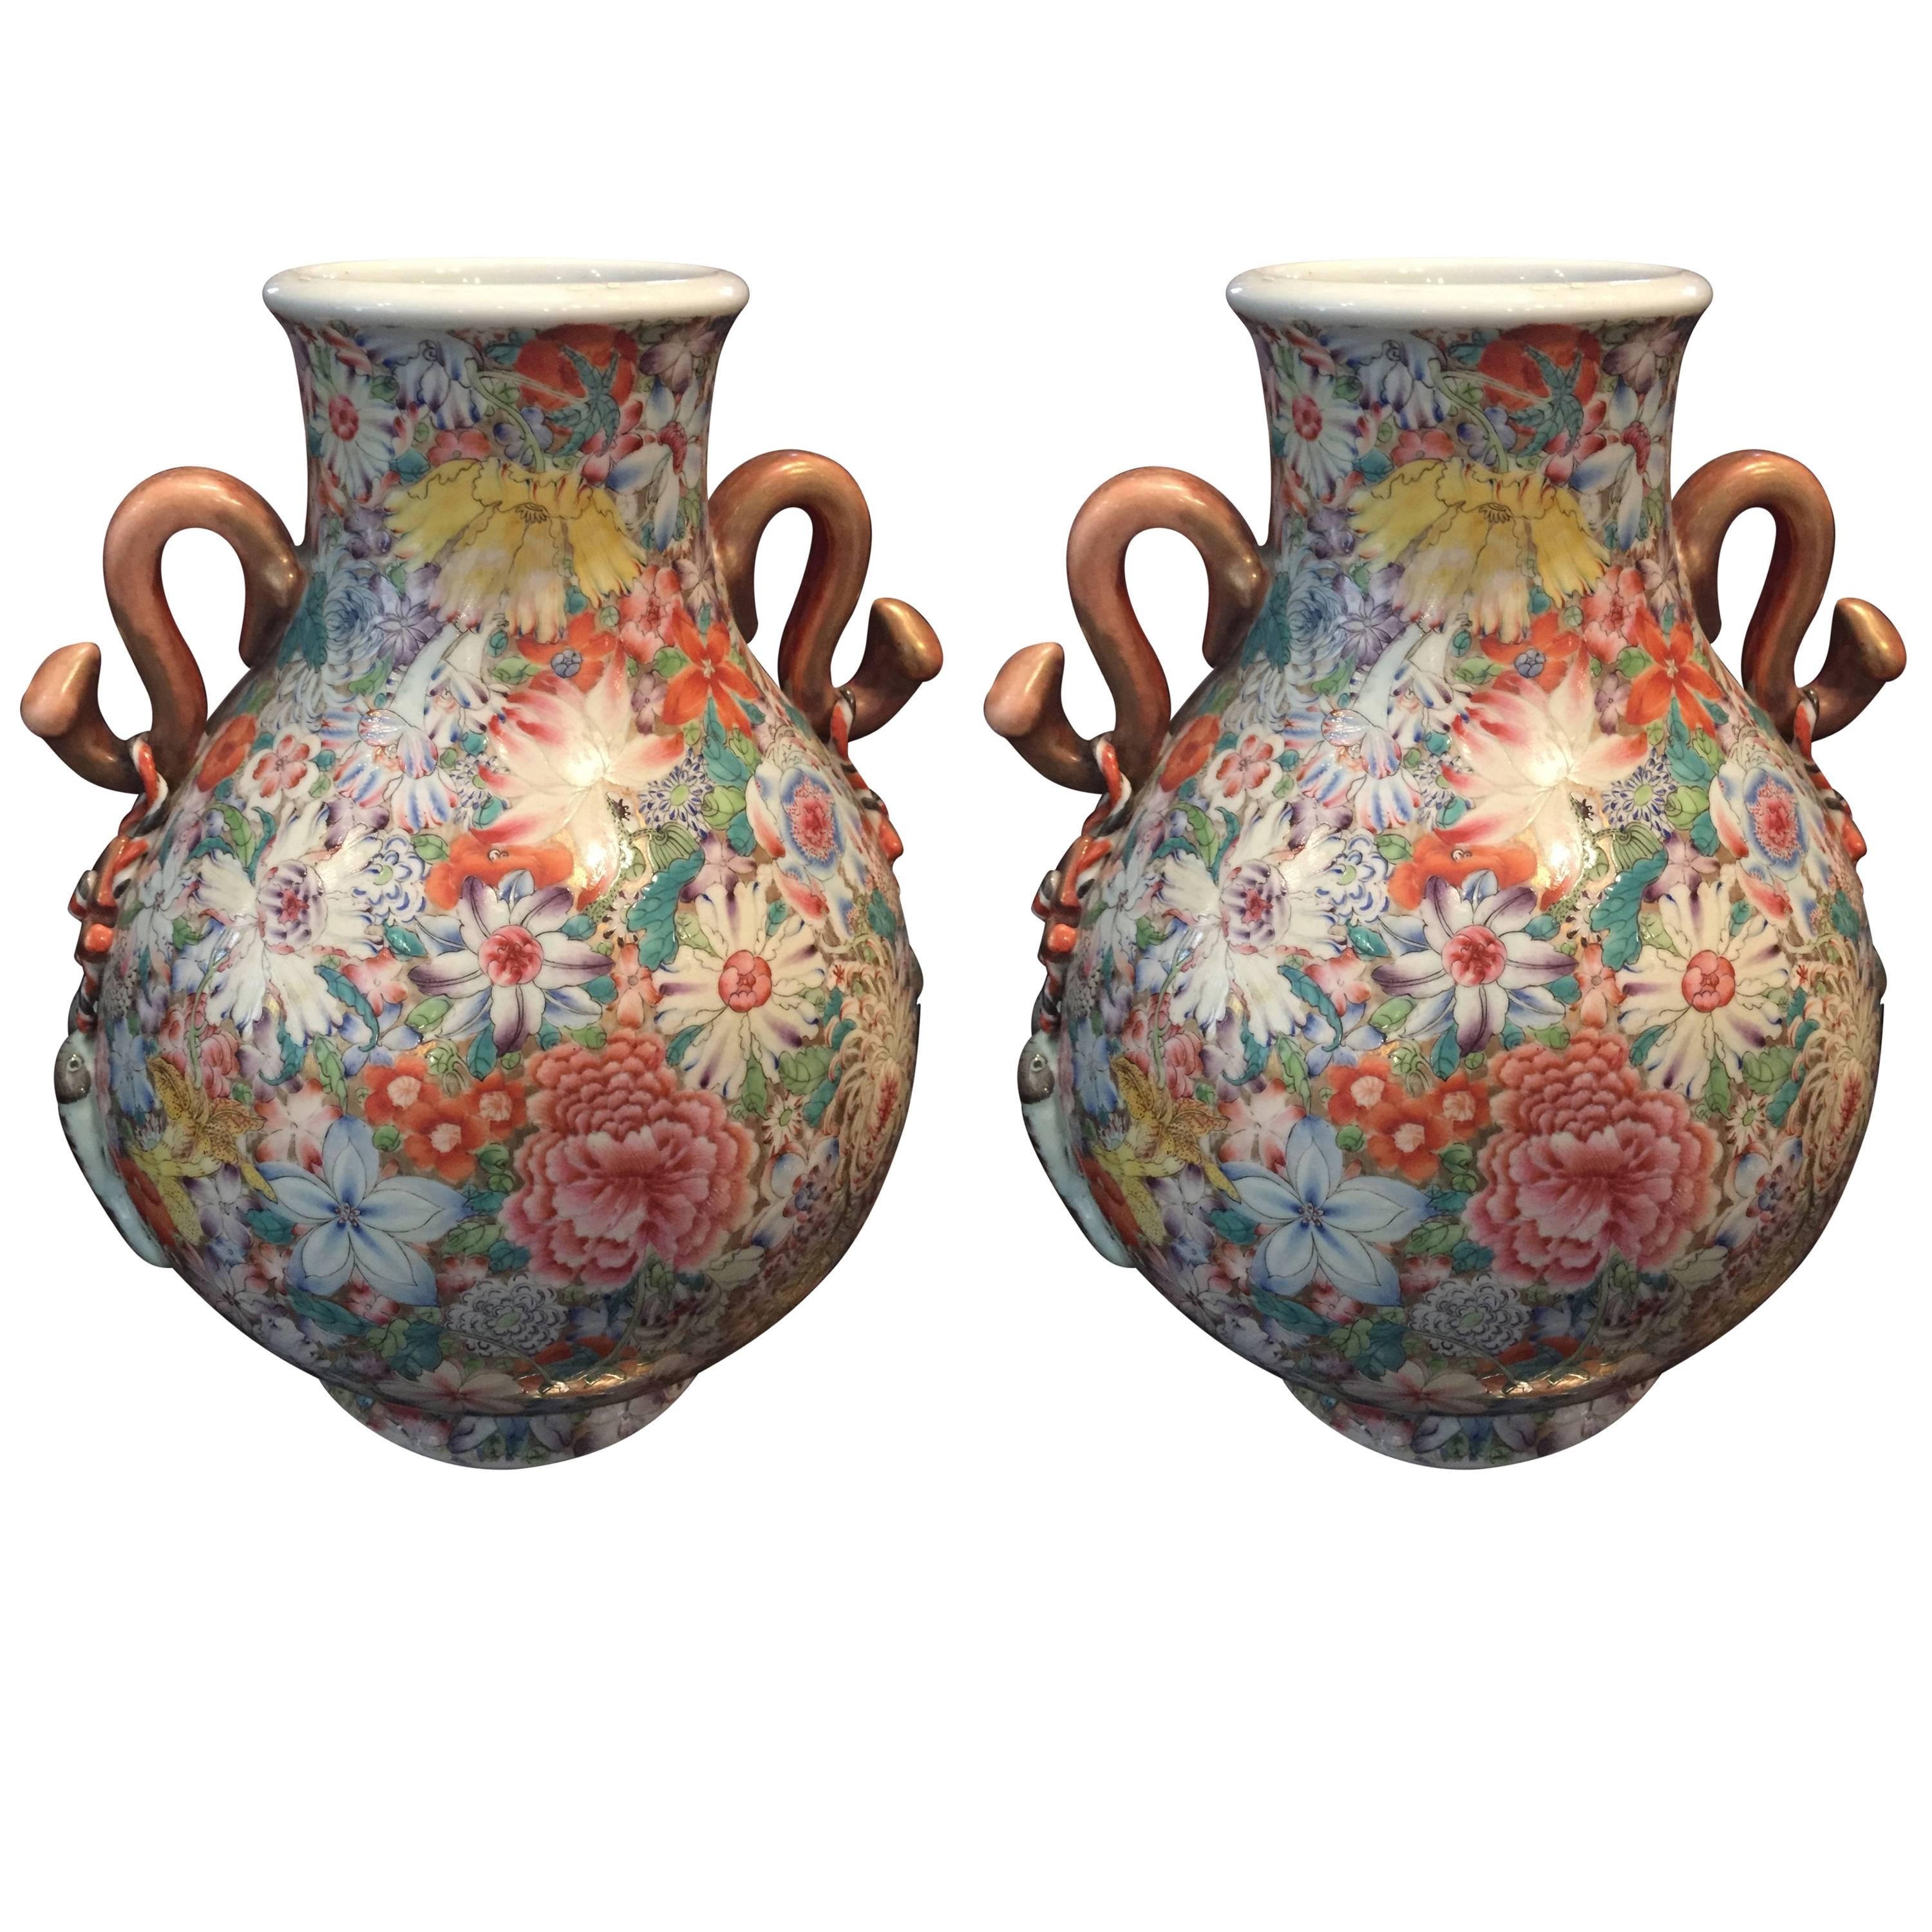 Qing Dynasty Famille Rose, 19th Century Pair of Vases